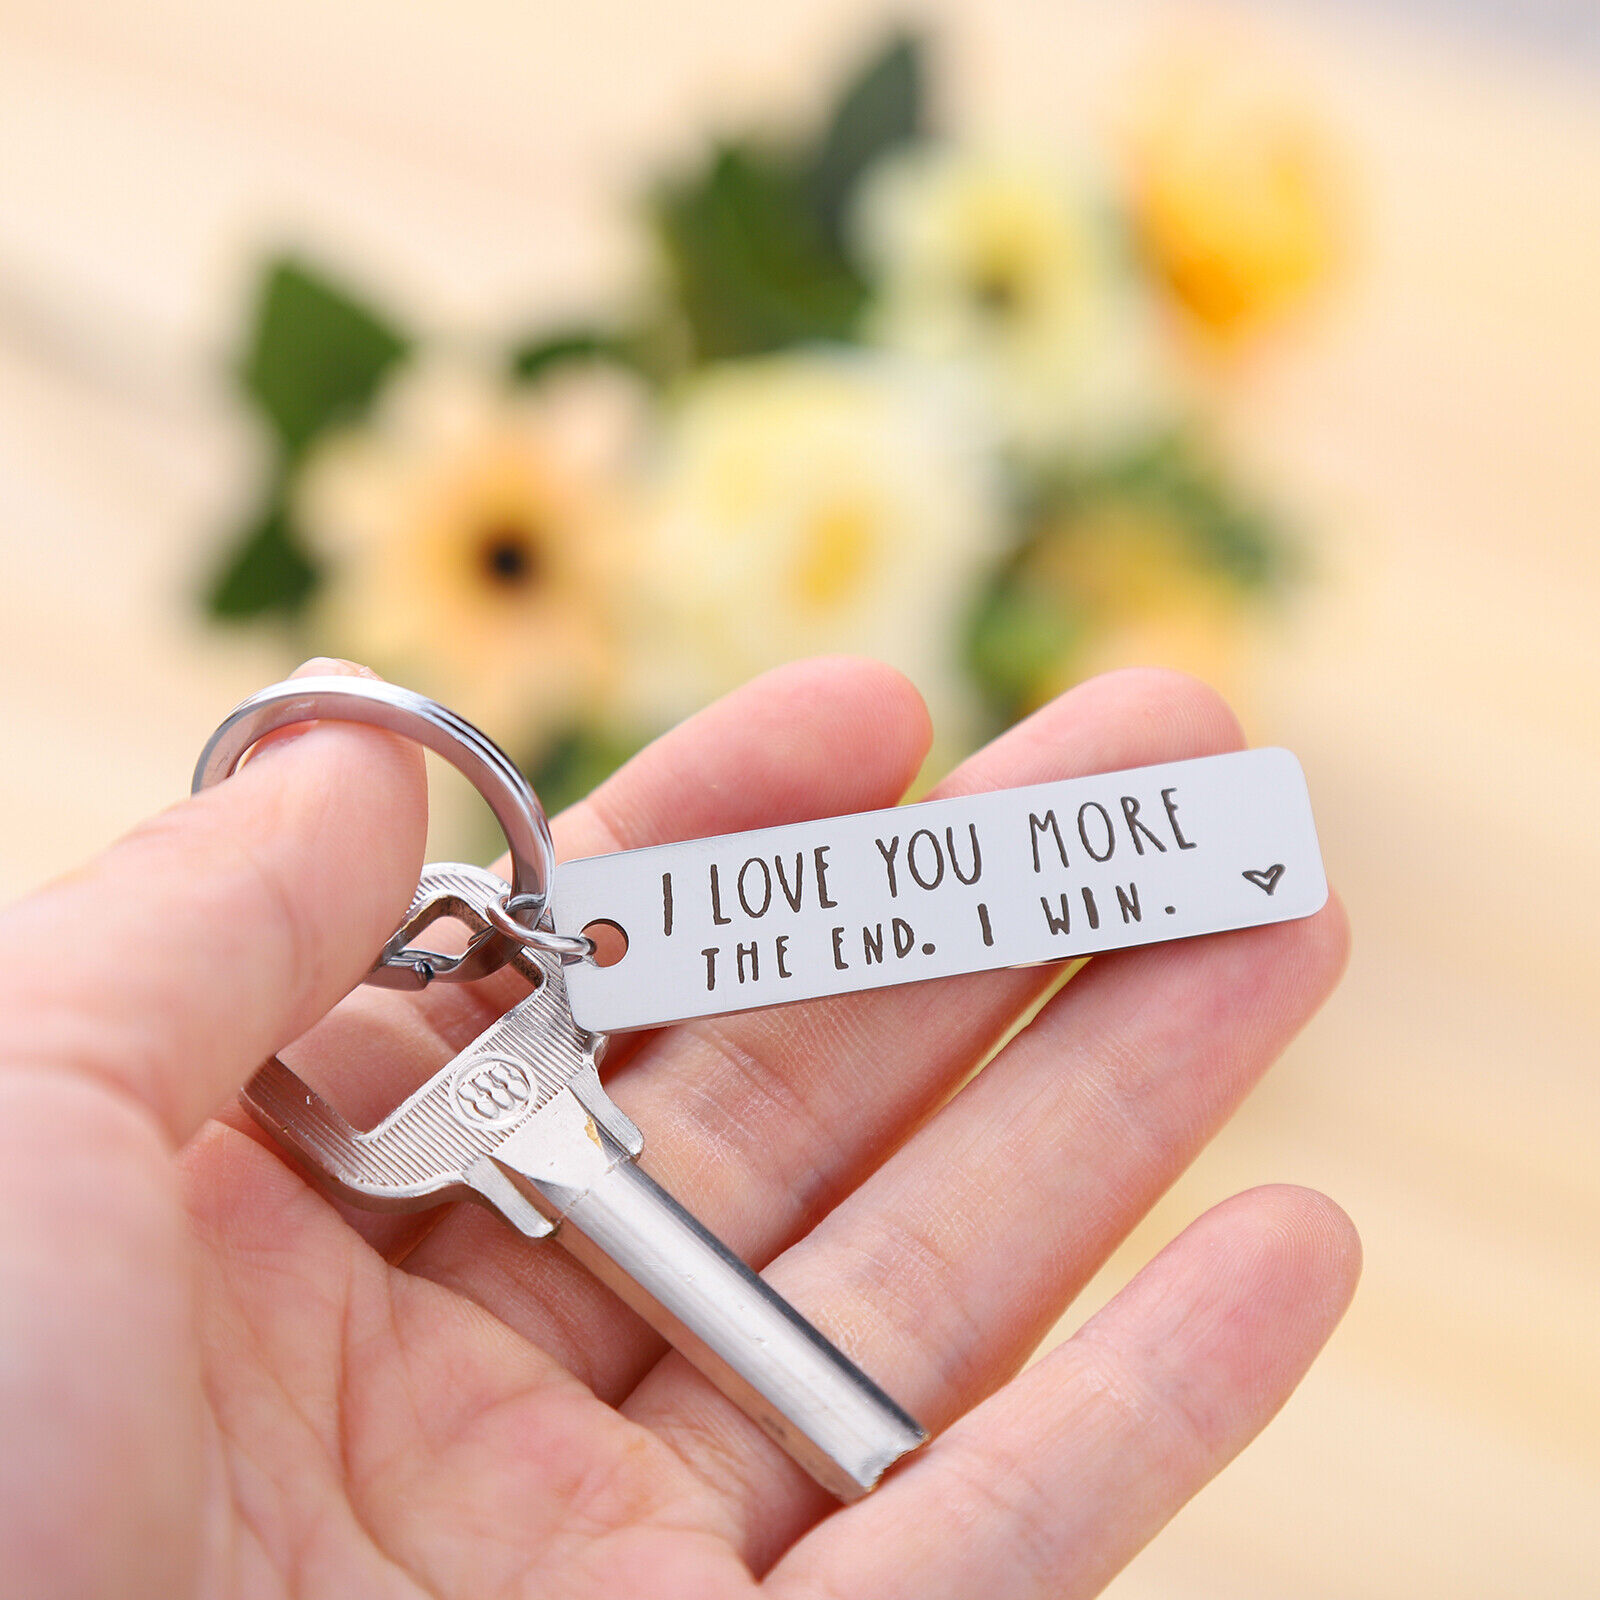 I Love You More Most The End I Win Couples Novelty Keyring Steel Keychain Gift